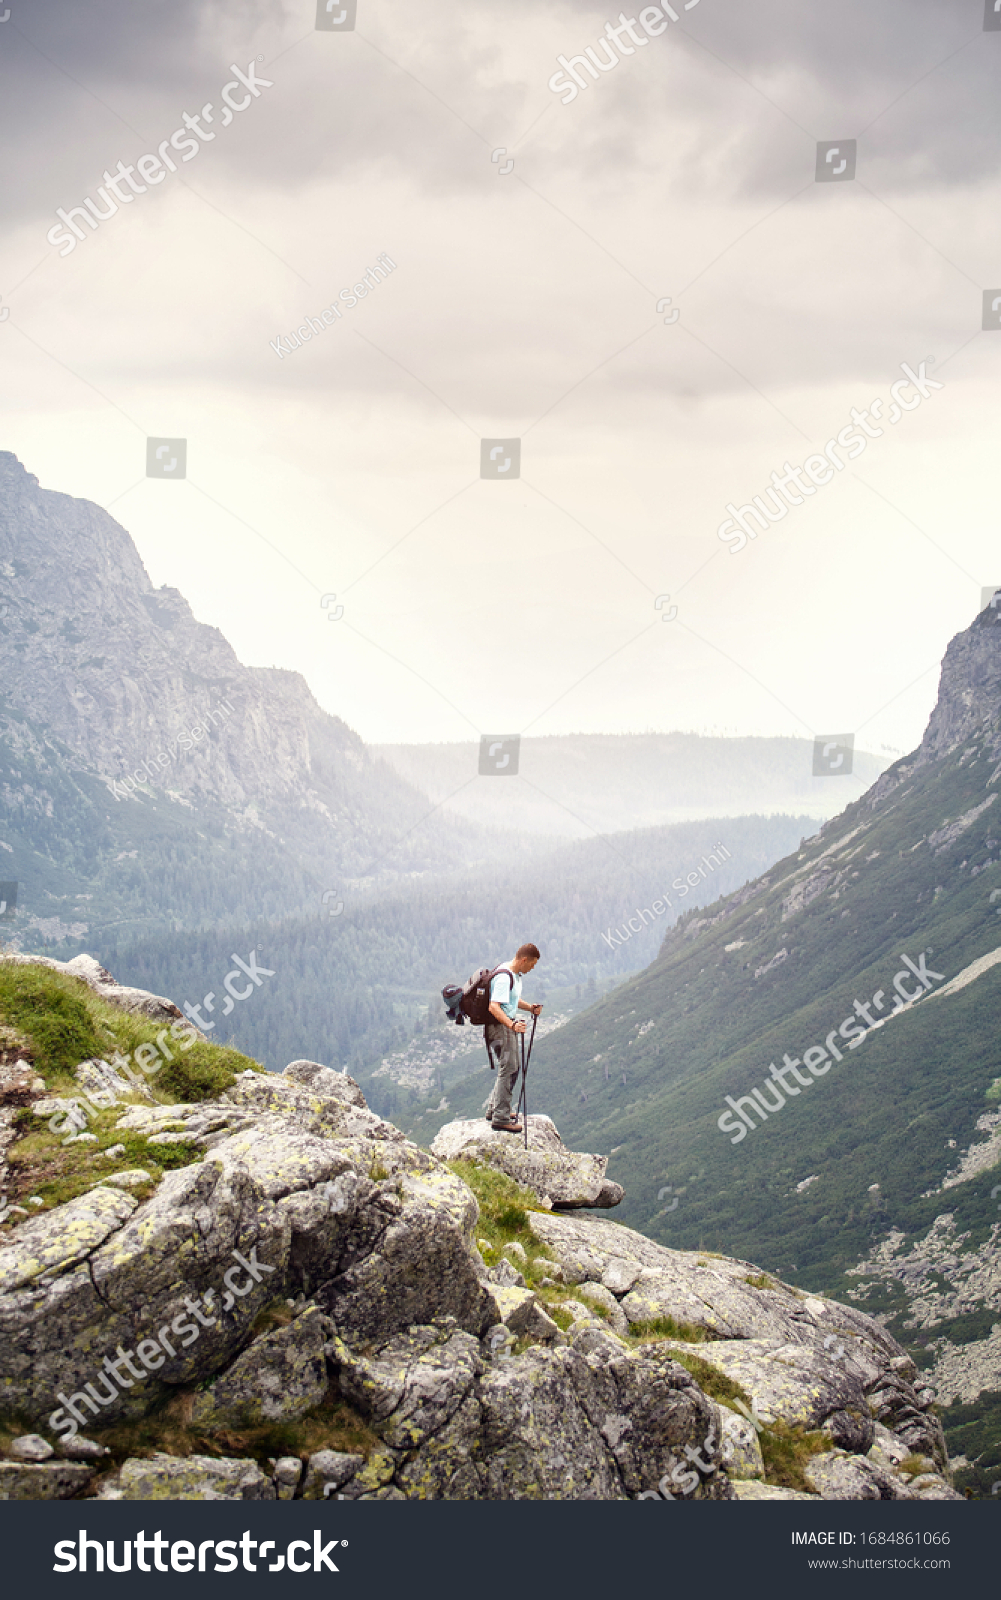 Hiker with backpack standing on top of a mountain. Lifestyle success concept adventure active vacations outdoor happiness freedom emotions. High Tatras mountains. #1684861066